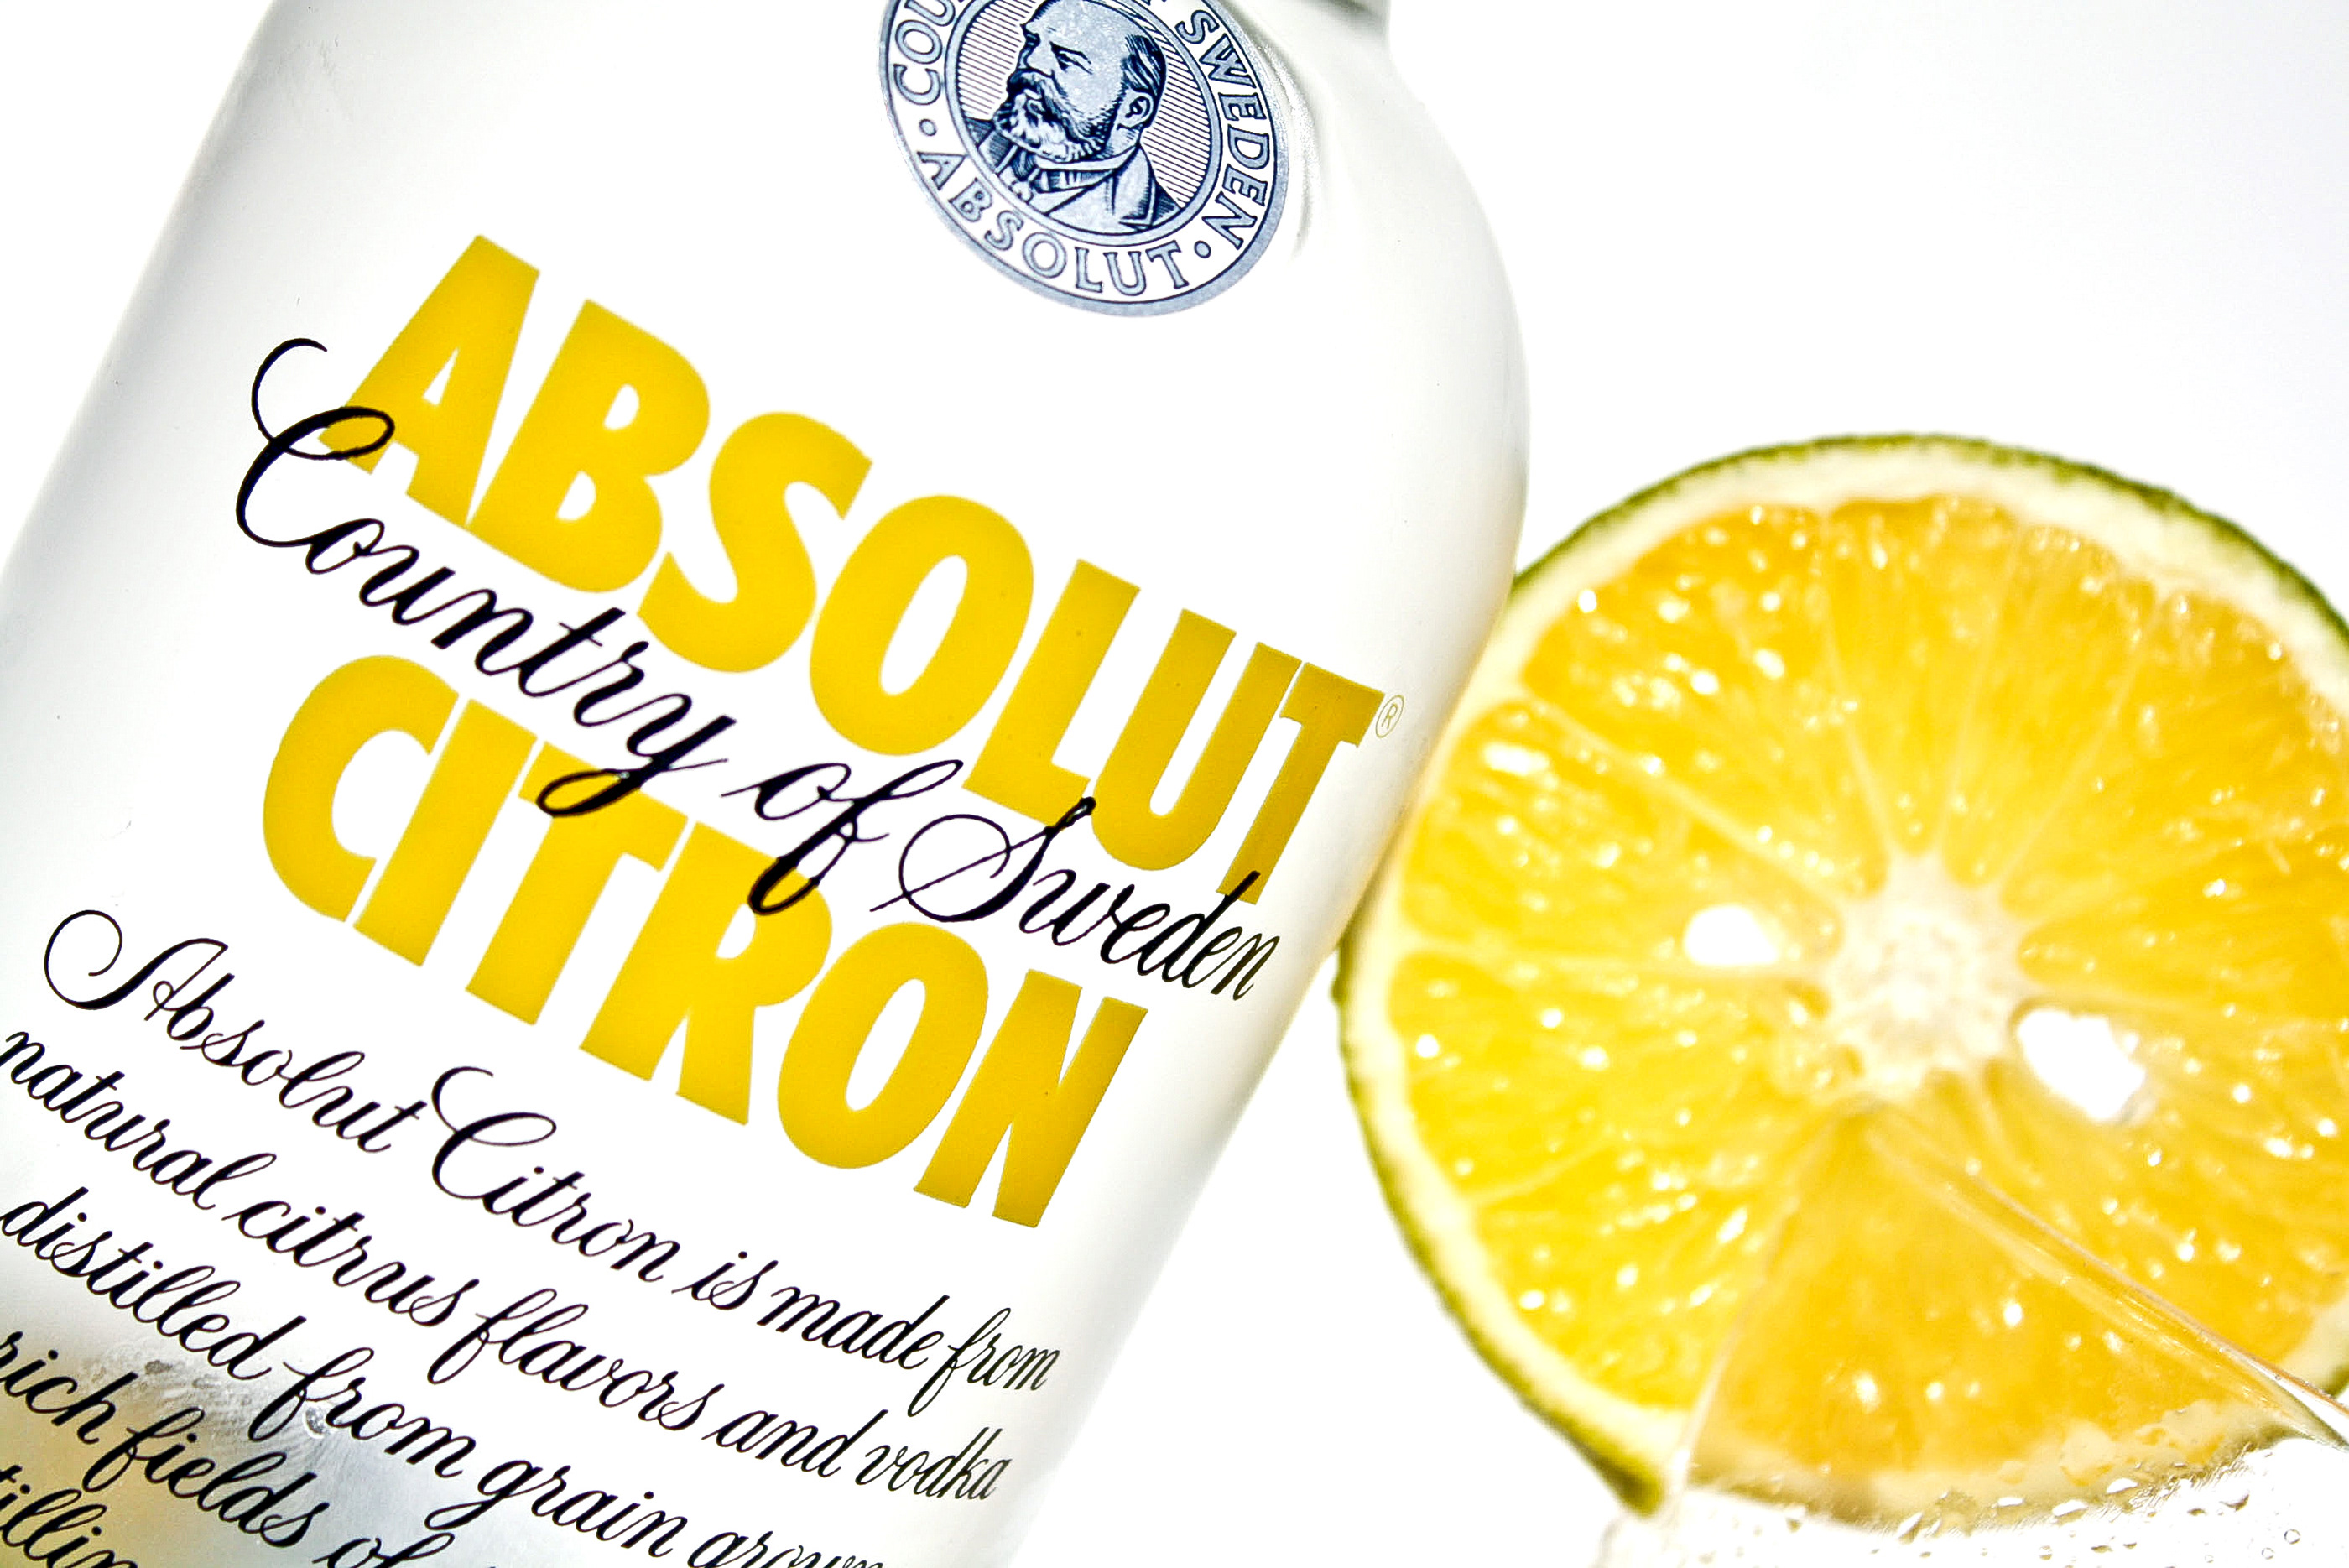 Absolut Vodka product photography